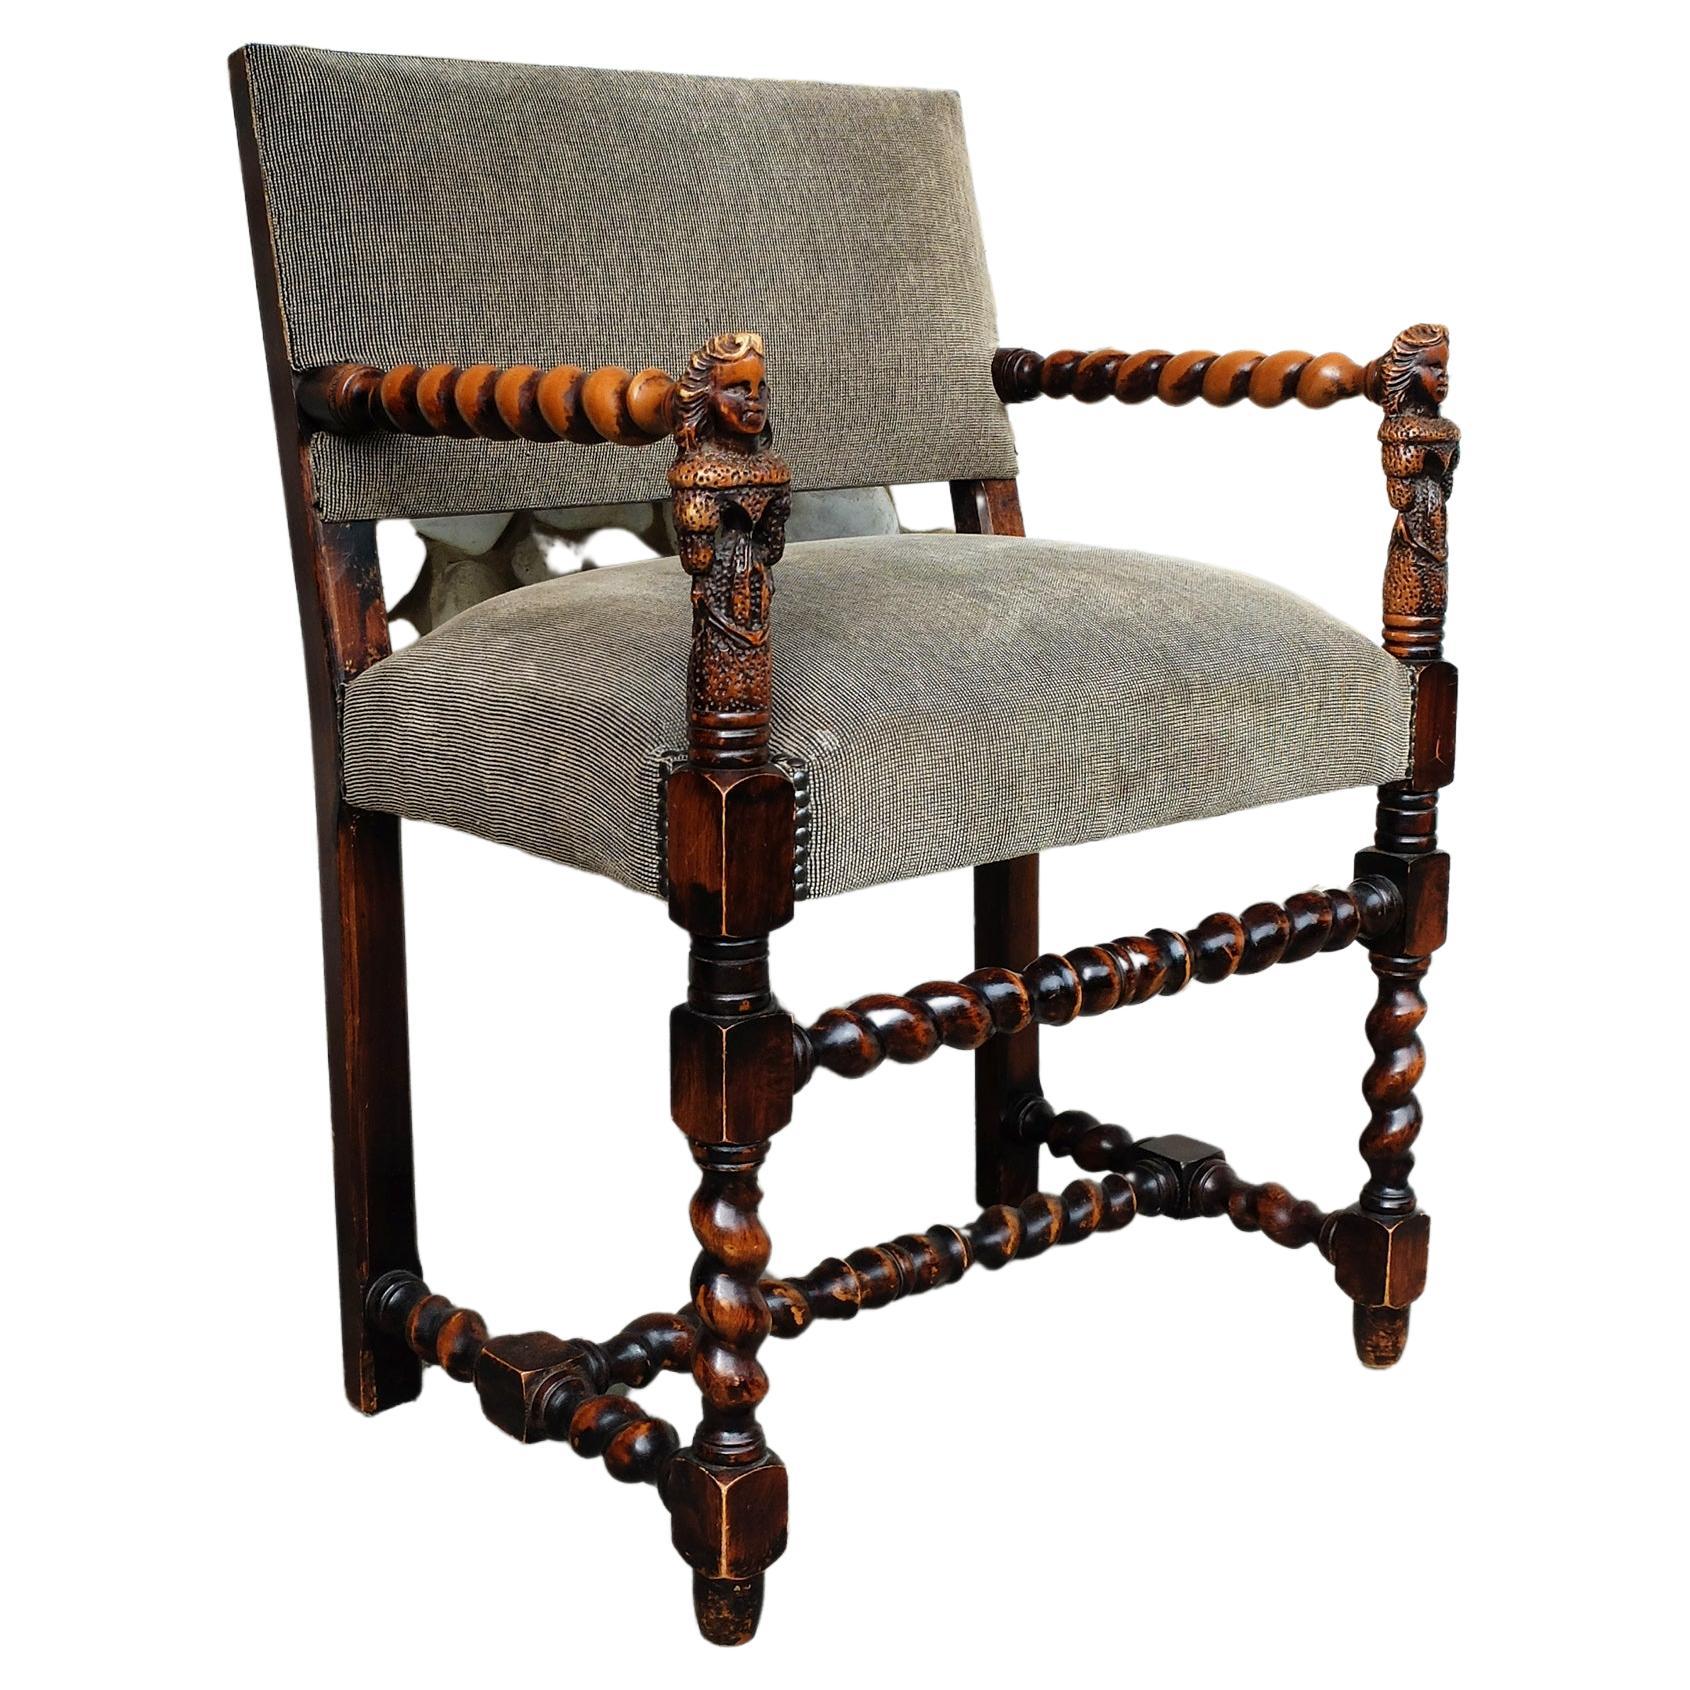 Antique French Louis XIII Style Armchair from the 19th Century, Sculpted